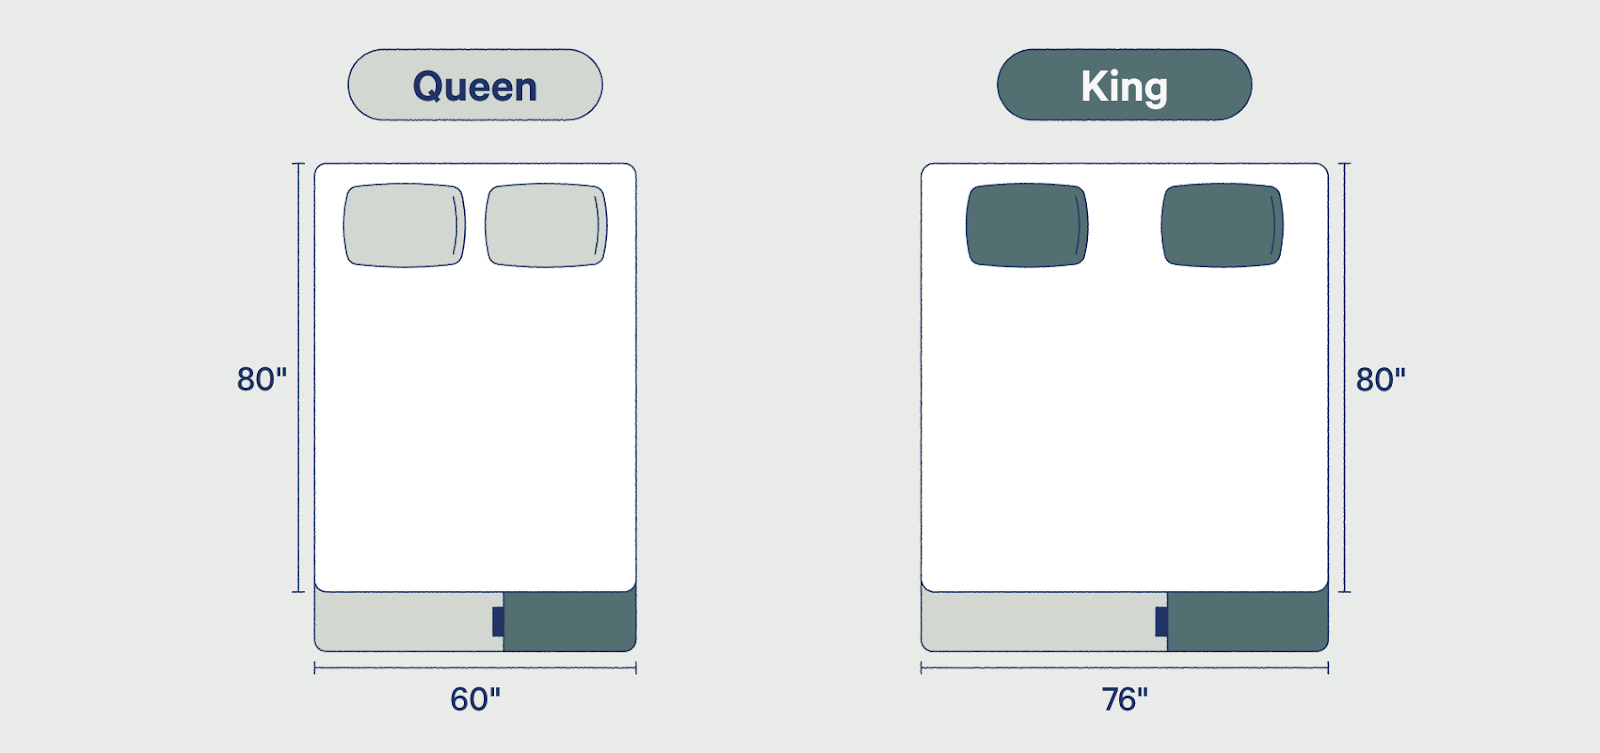 King Vs Queen Bed Size And Comparison, Are There Beds Bigger Than King Size